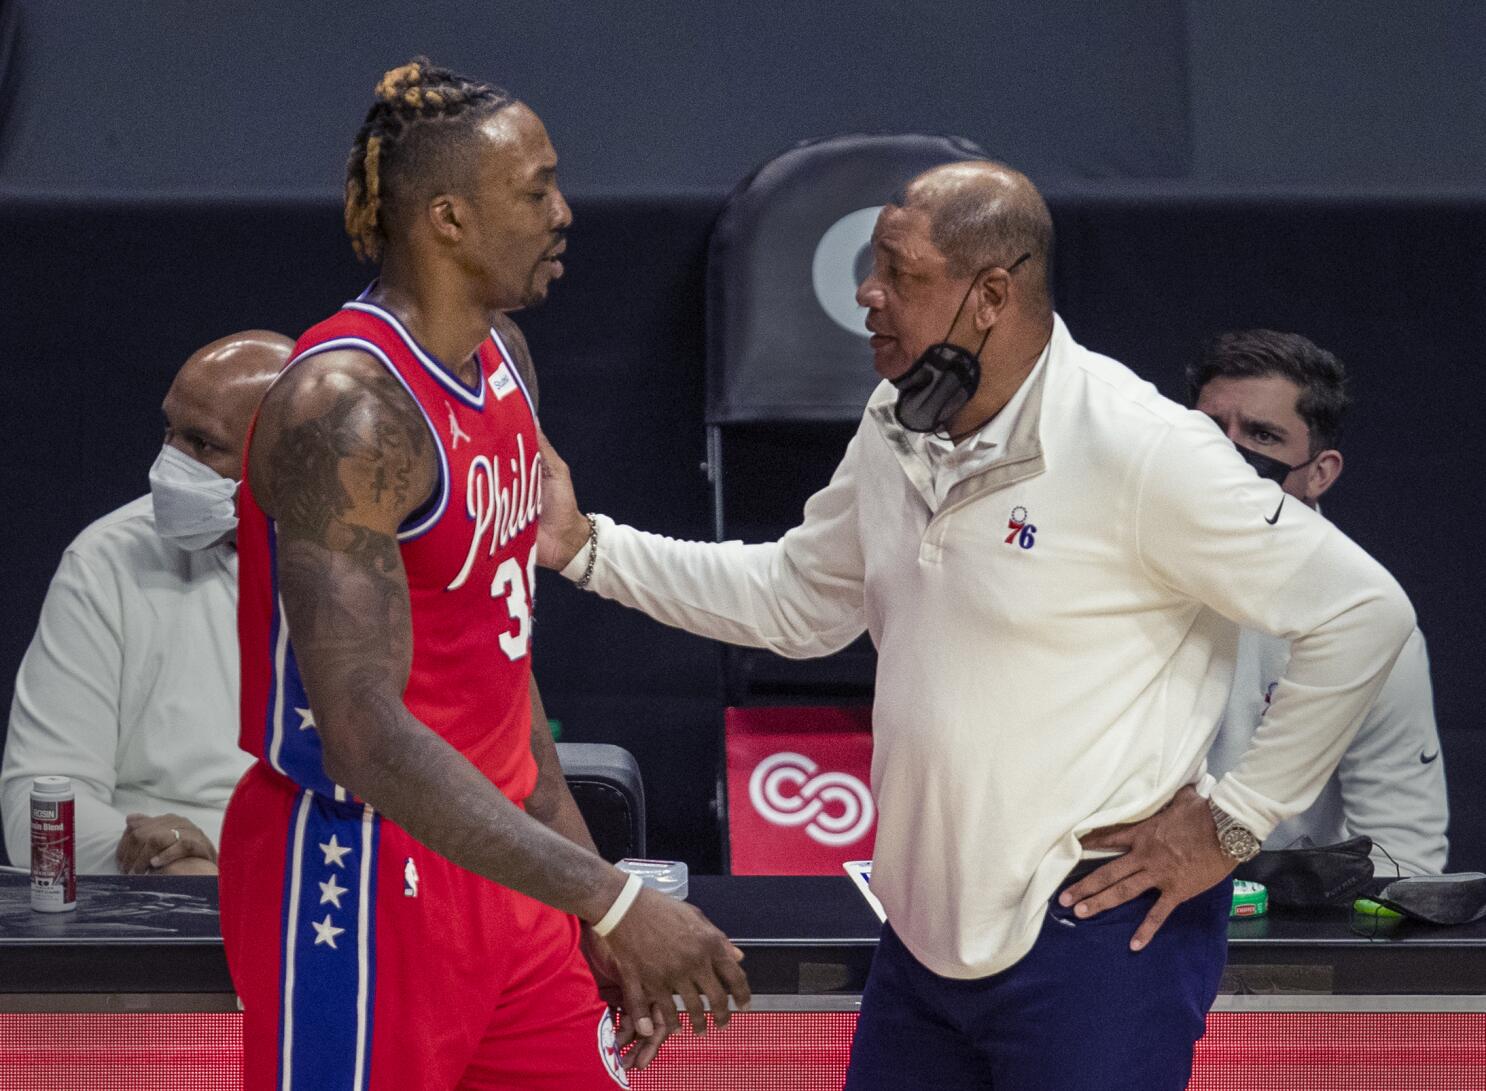 Doc Rivers coaching guarantees a championship for the Clippers